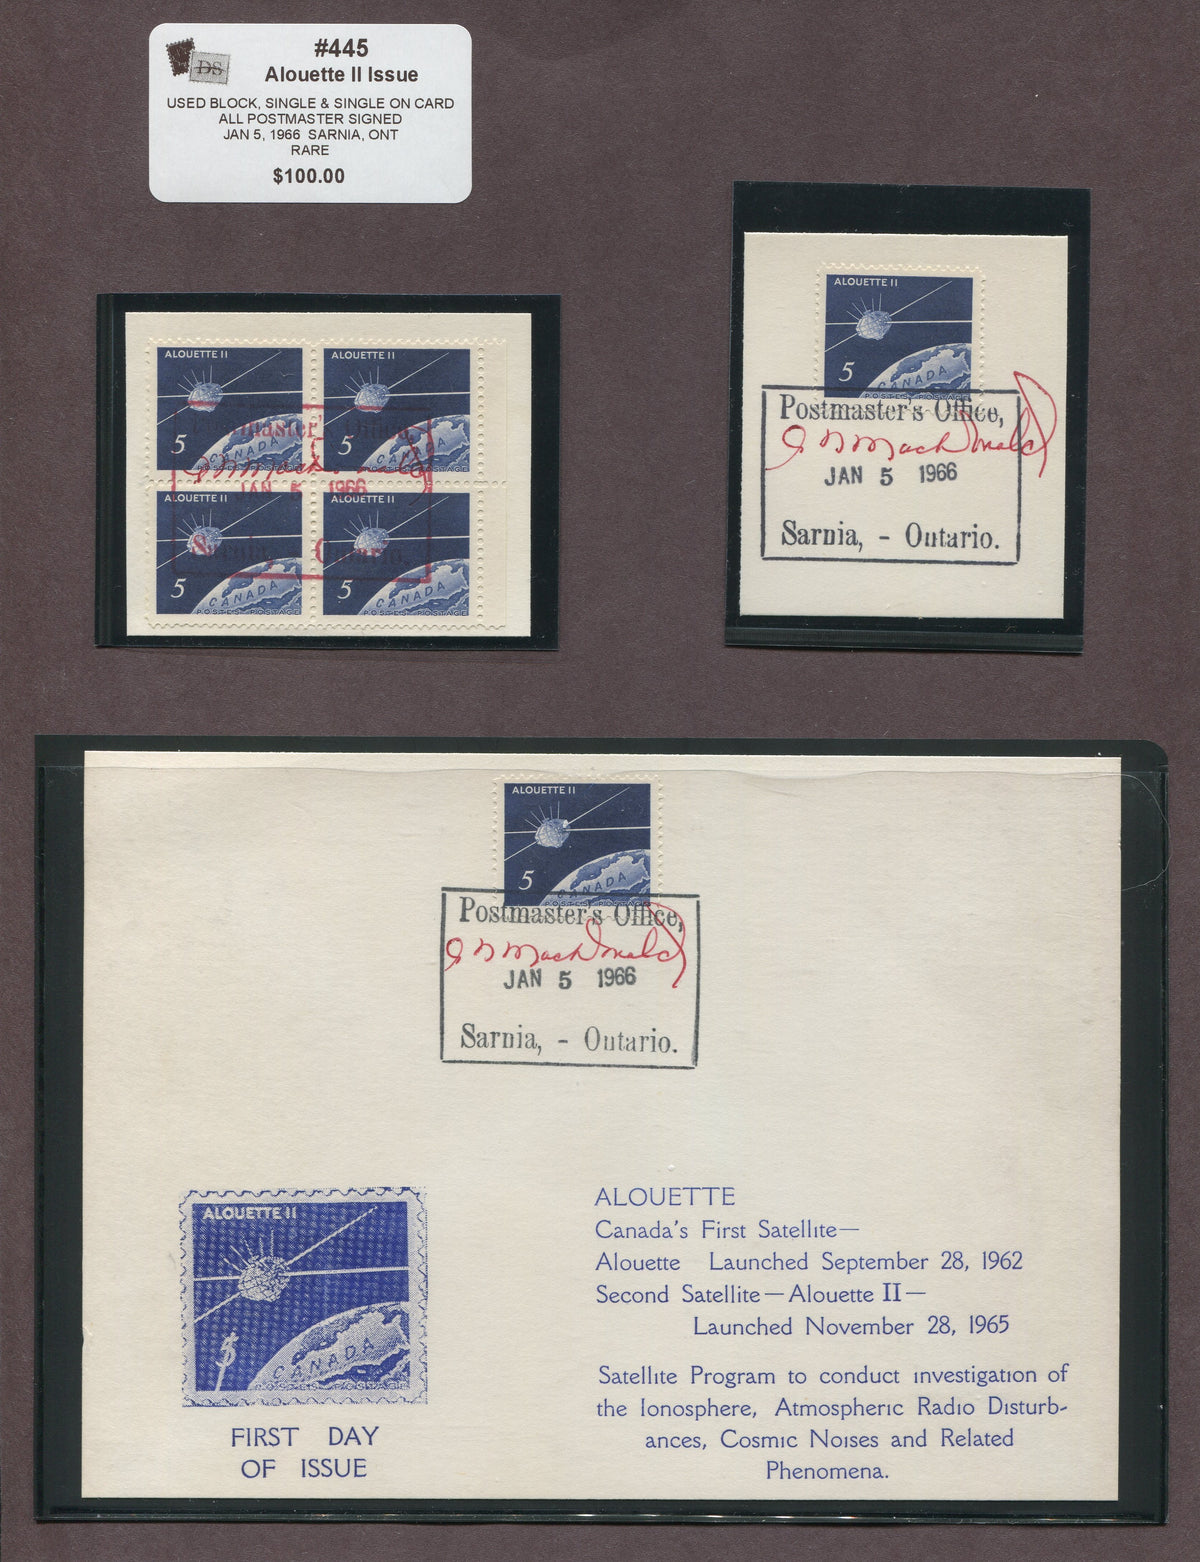 0445CA1708 - Canada #445 - Postmaster Signed